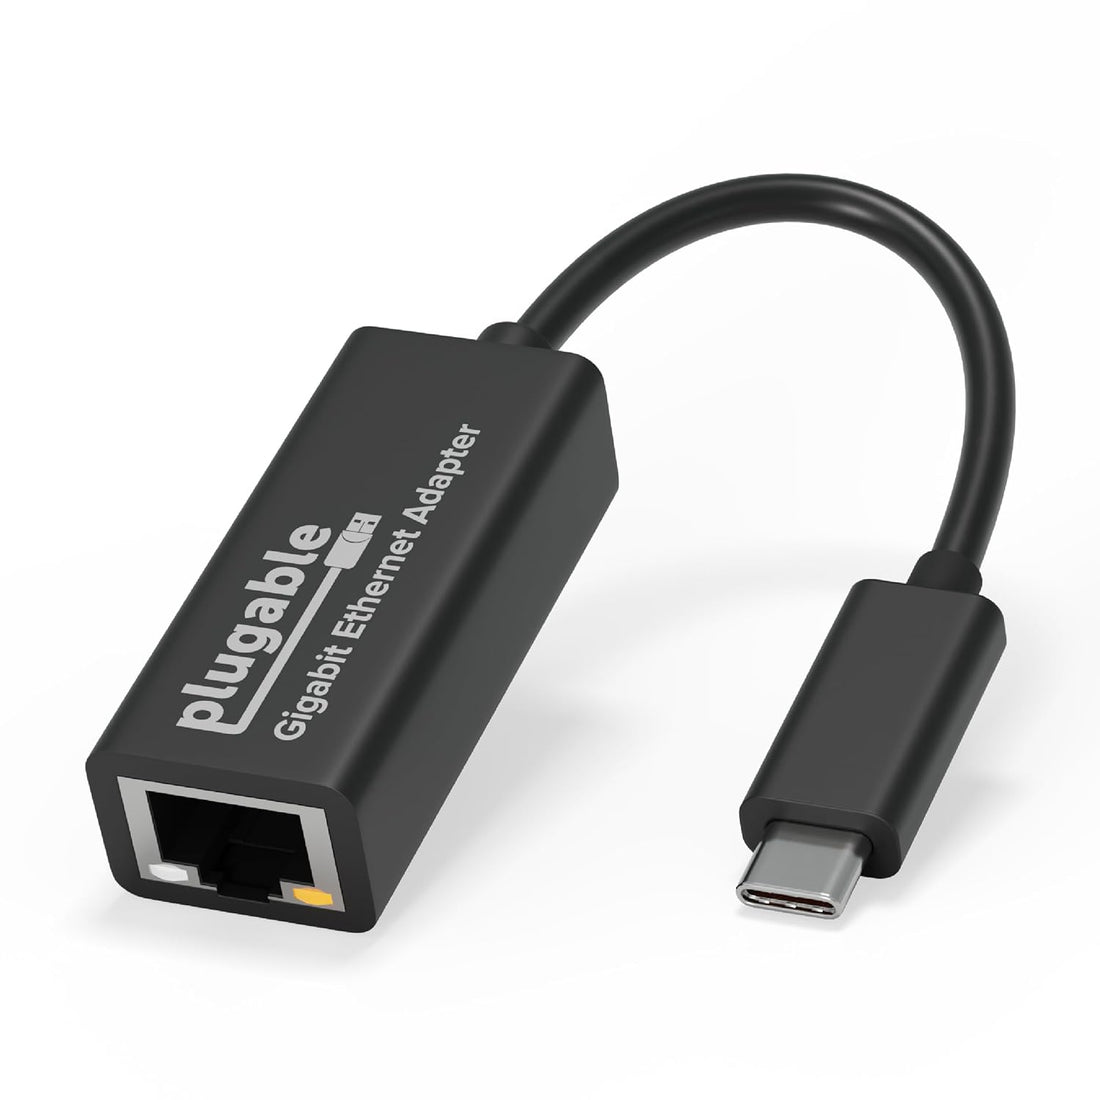 Plugable USB-C to 10/100/1000 Gigabit Ethernet LAN Network Adapter (Compatible with Windows, Mac OS, Linux, Chrome OS)